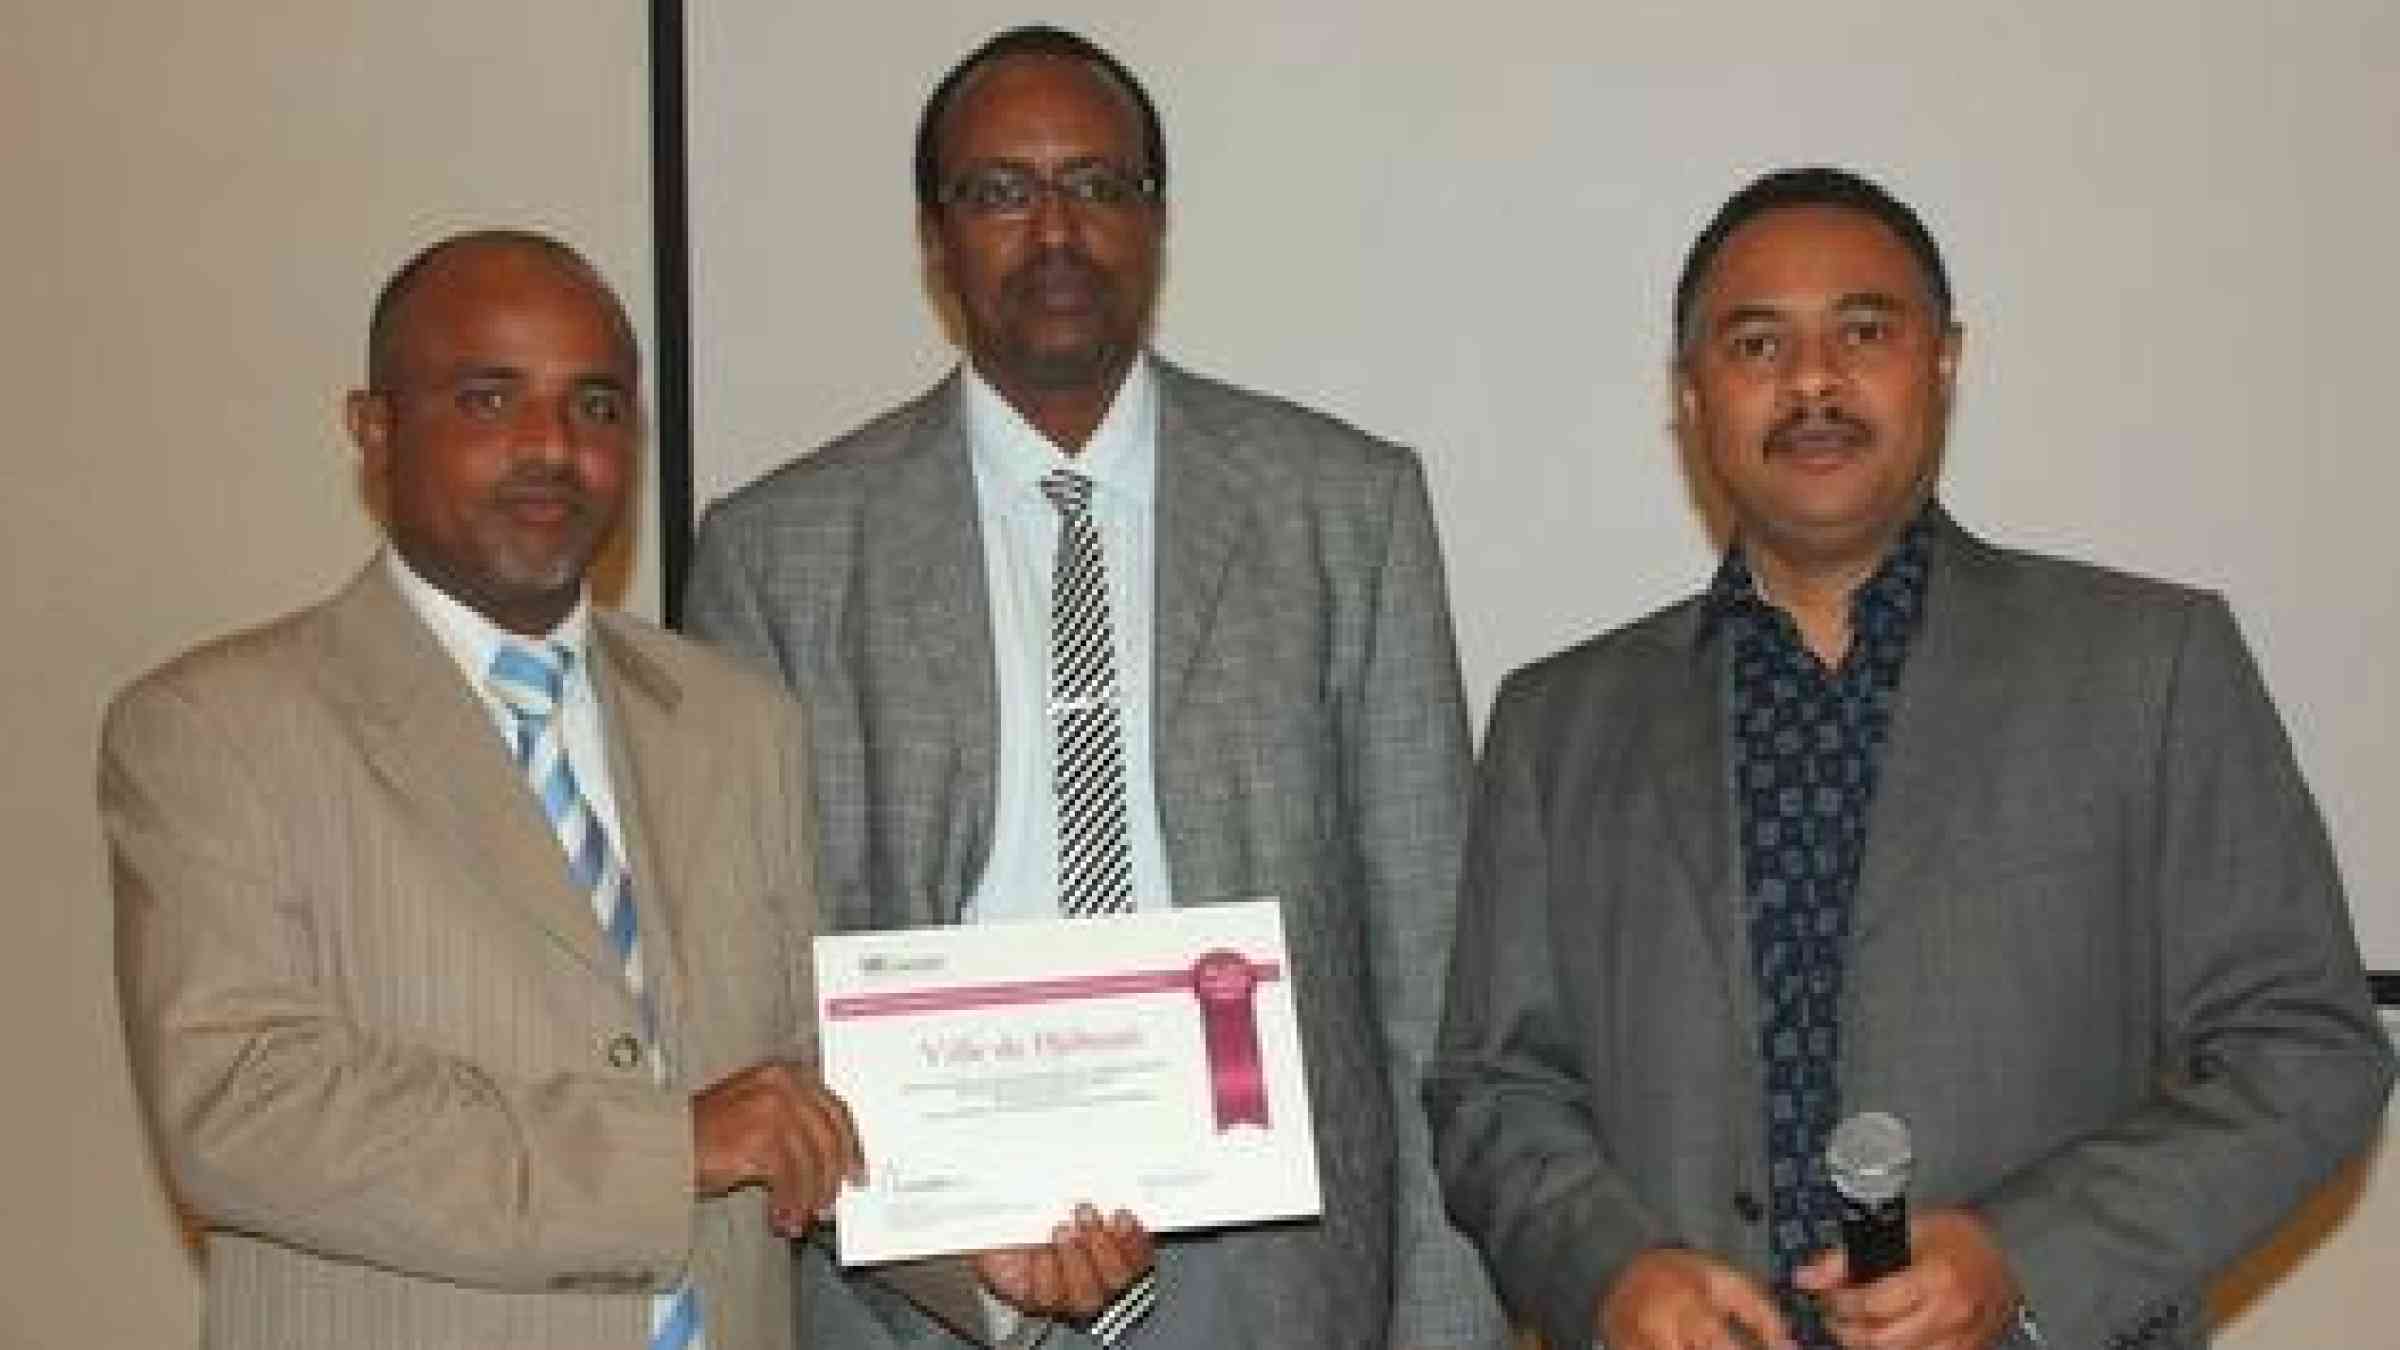 From left: Mayor of Balbala Ali Dato, who received the Making Cities Resilient campaign certificate on behalf of the Mayor of Djibouti Abdourahman Mohamed Guelleh, HFA National Focal Point Ahmed Mohamed Madar, and Head of UNISDR's Regional Office in the Arab States Amjad Abbashar.